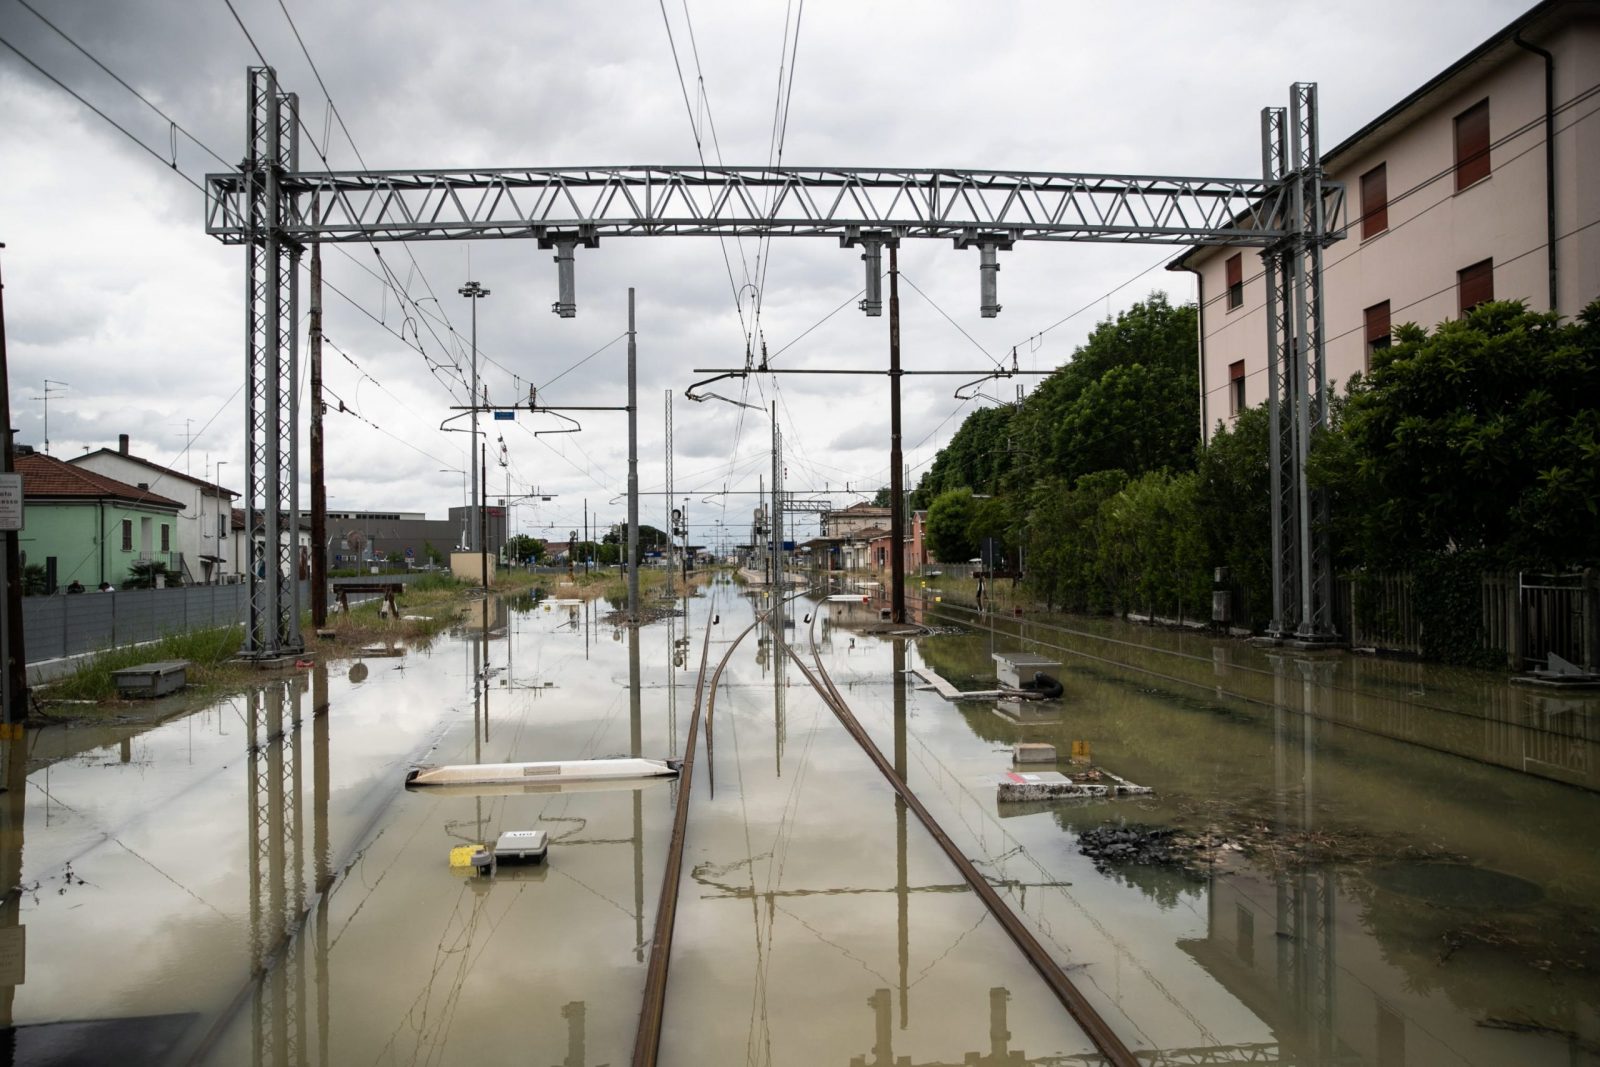 epa10636395 The platforms of the station flooded due to the flooding of a river, in Lugo, near Ravenna, Italy, 18 May 2023. Parts of Lugo in the province of Ravenna were under a meter of water in the morning of 18 May following the overflowing of the Senio and Santerno rivers amid heavy rains. Heavy rains have been battering the northern Italian region of Emilia Romagna following months of severe drought.  EPA/EMANUELE VALERI